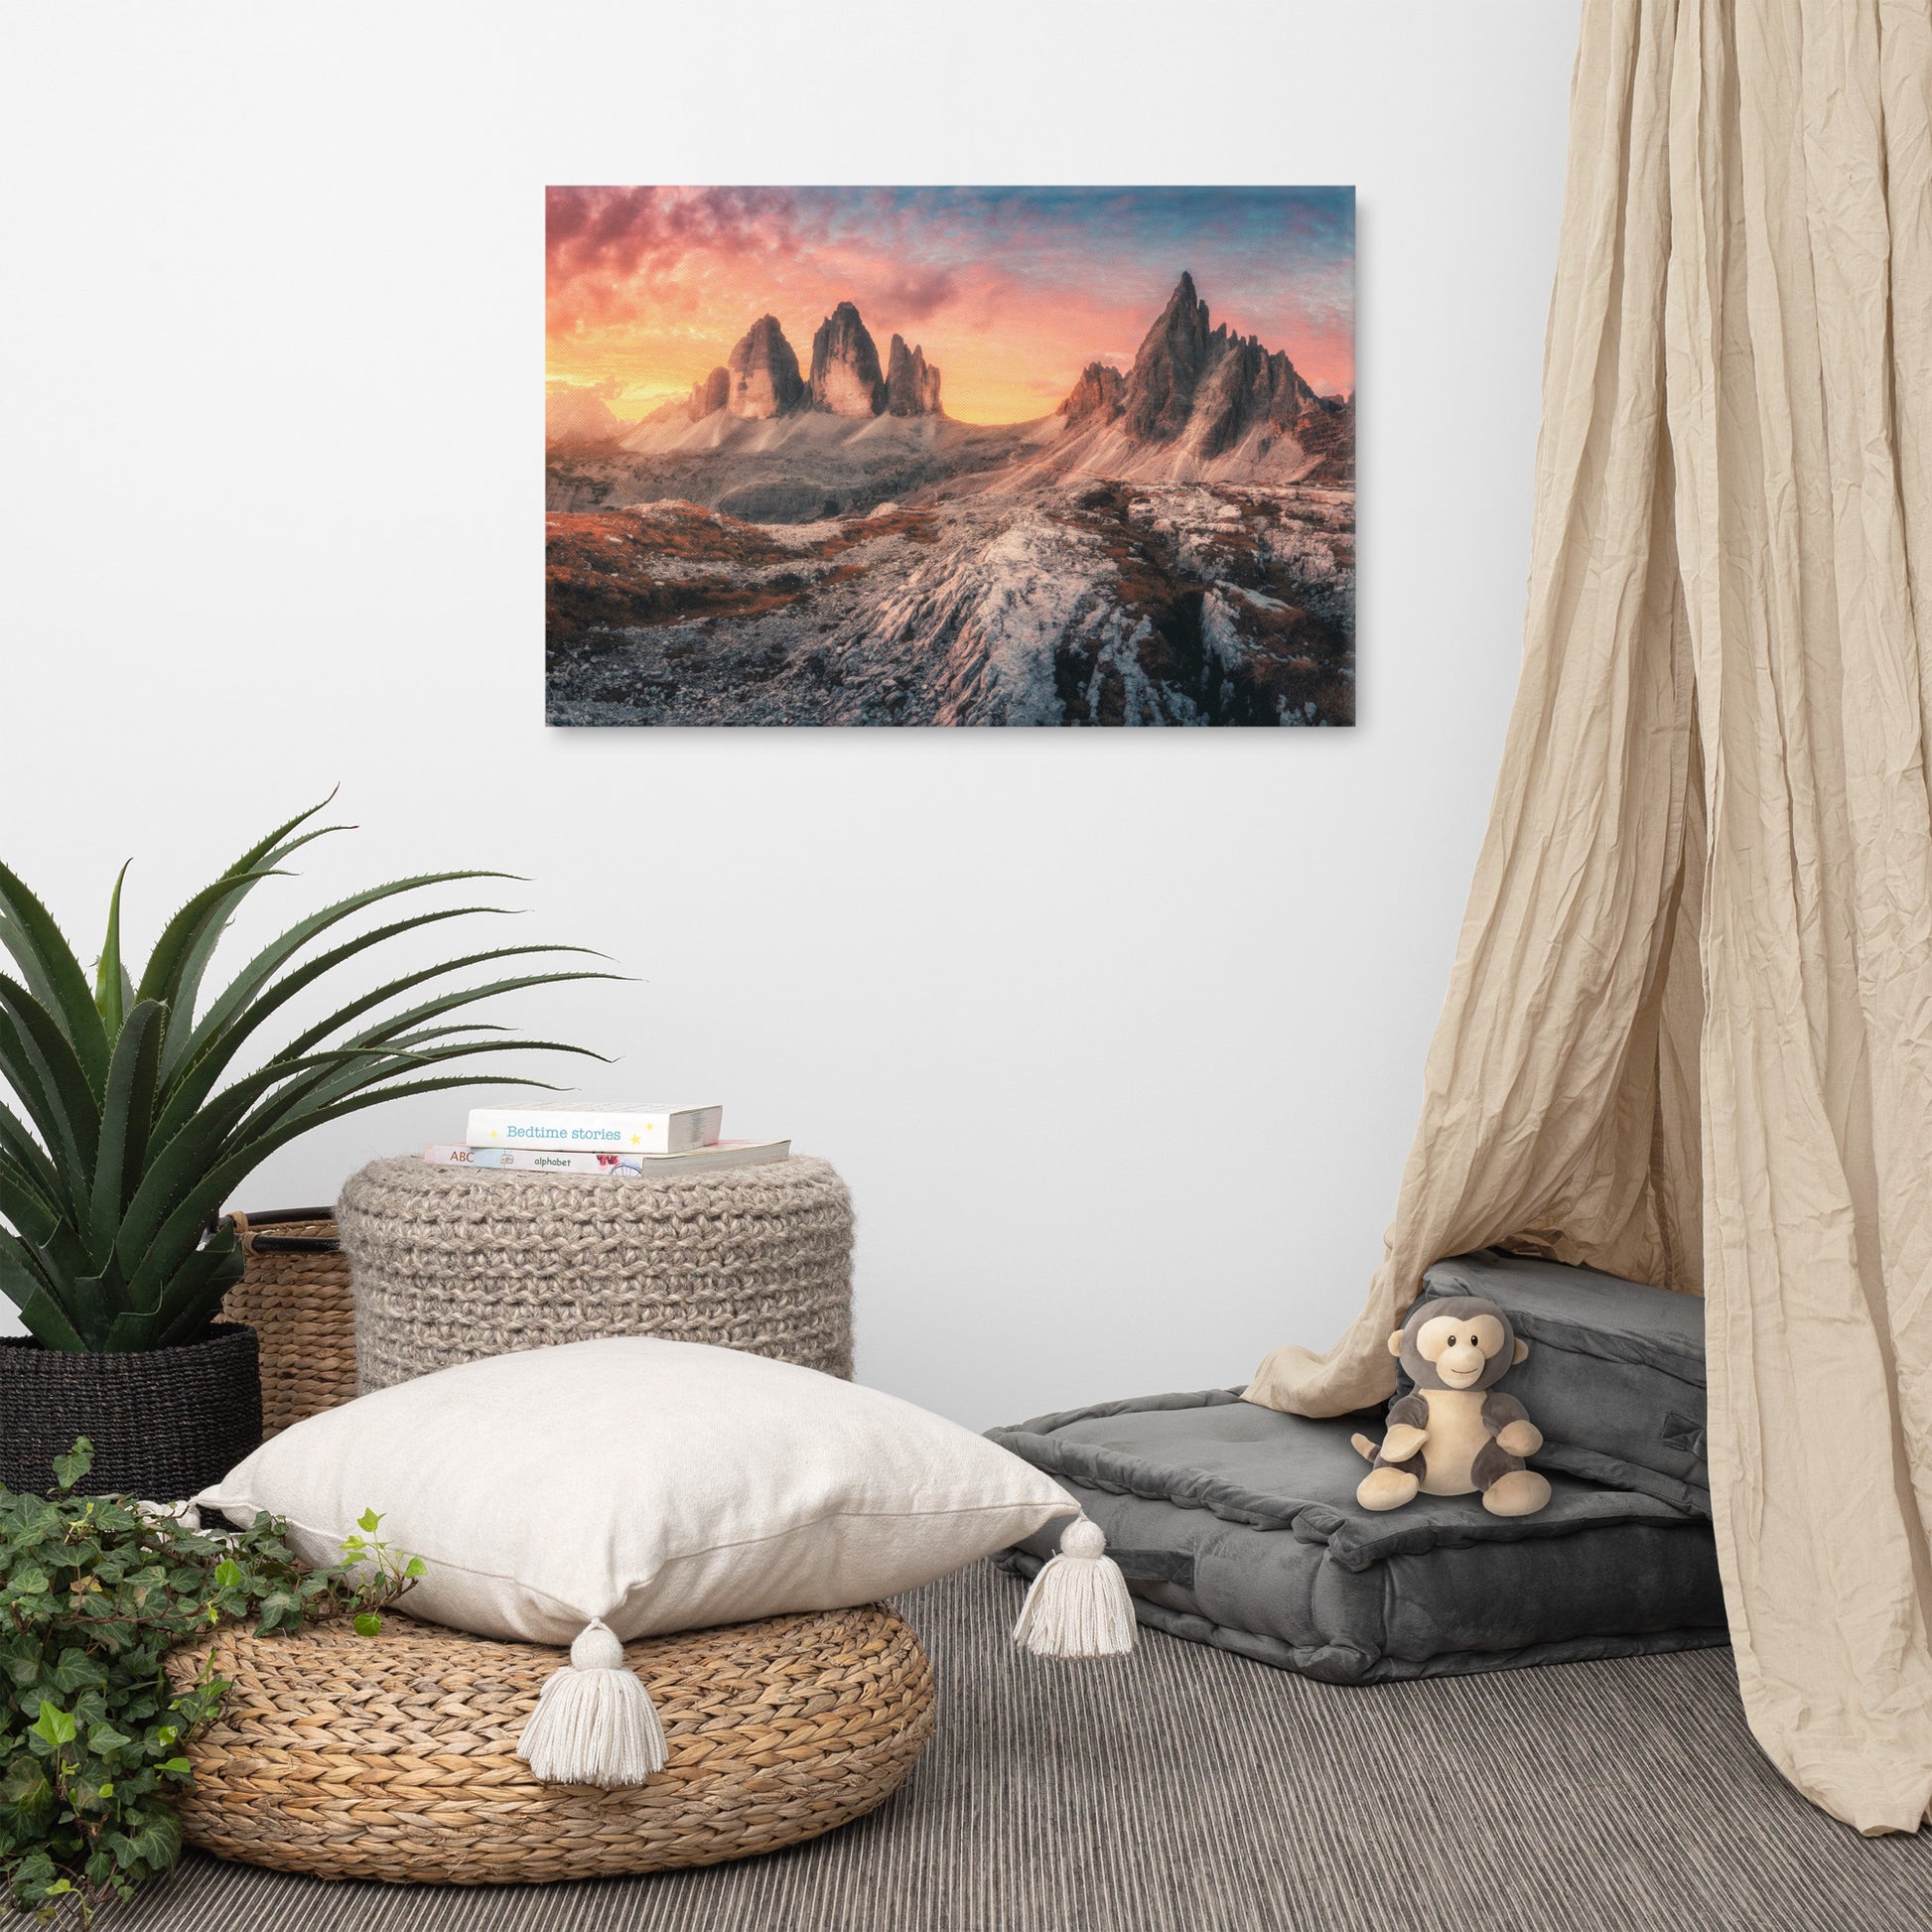 Mountains Colorful Cloudy Sunset 2 Landscape Photo Canvas Wall Art Prints